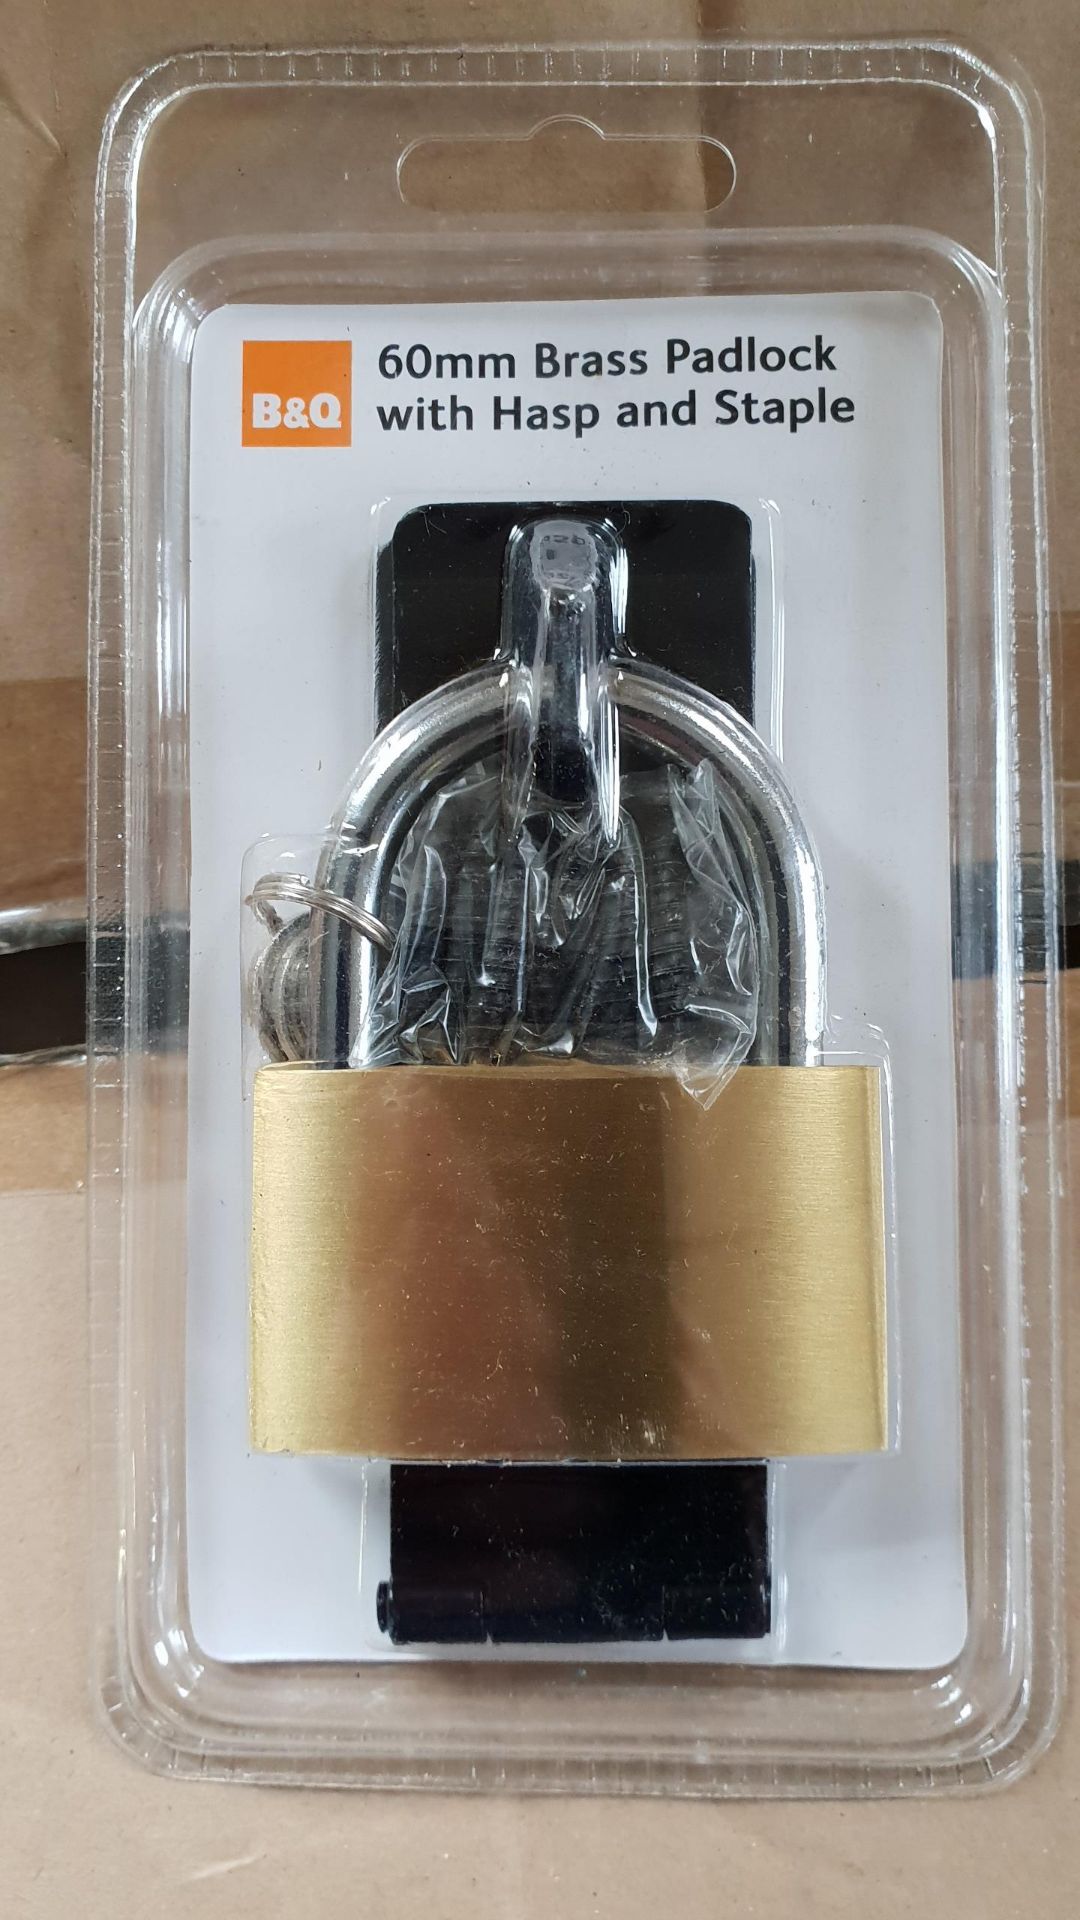 20 - 60mm padlock with hasp and staple